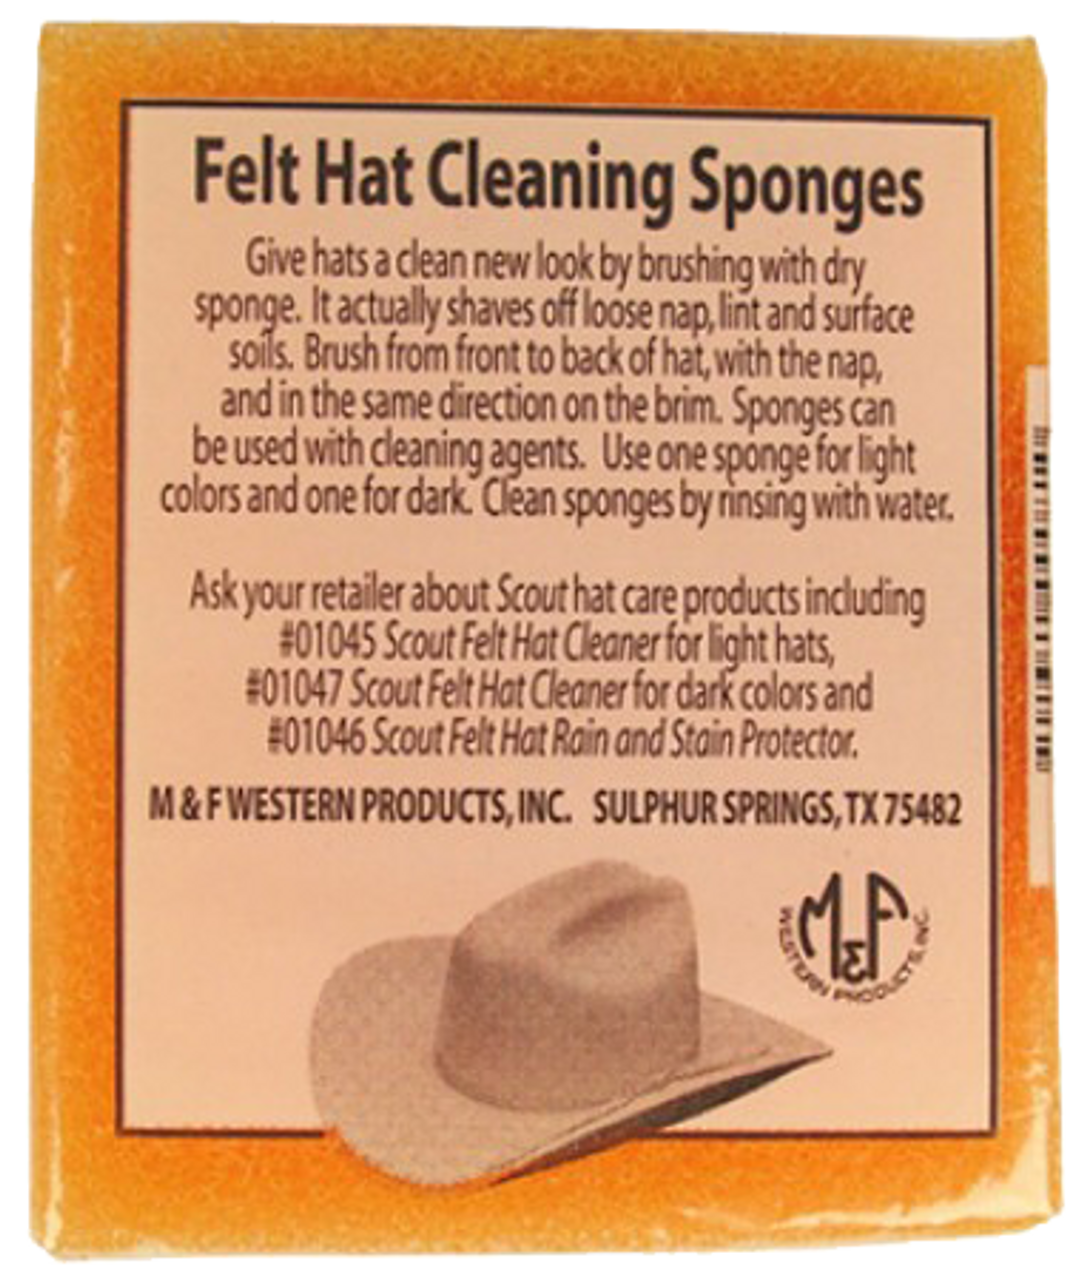 Boot Barn Ranch Hat Cleaning Sponges for Felt Hats